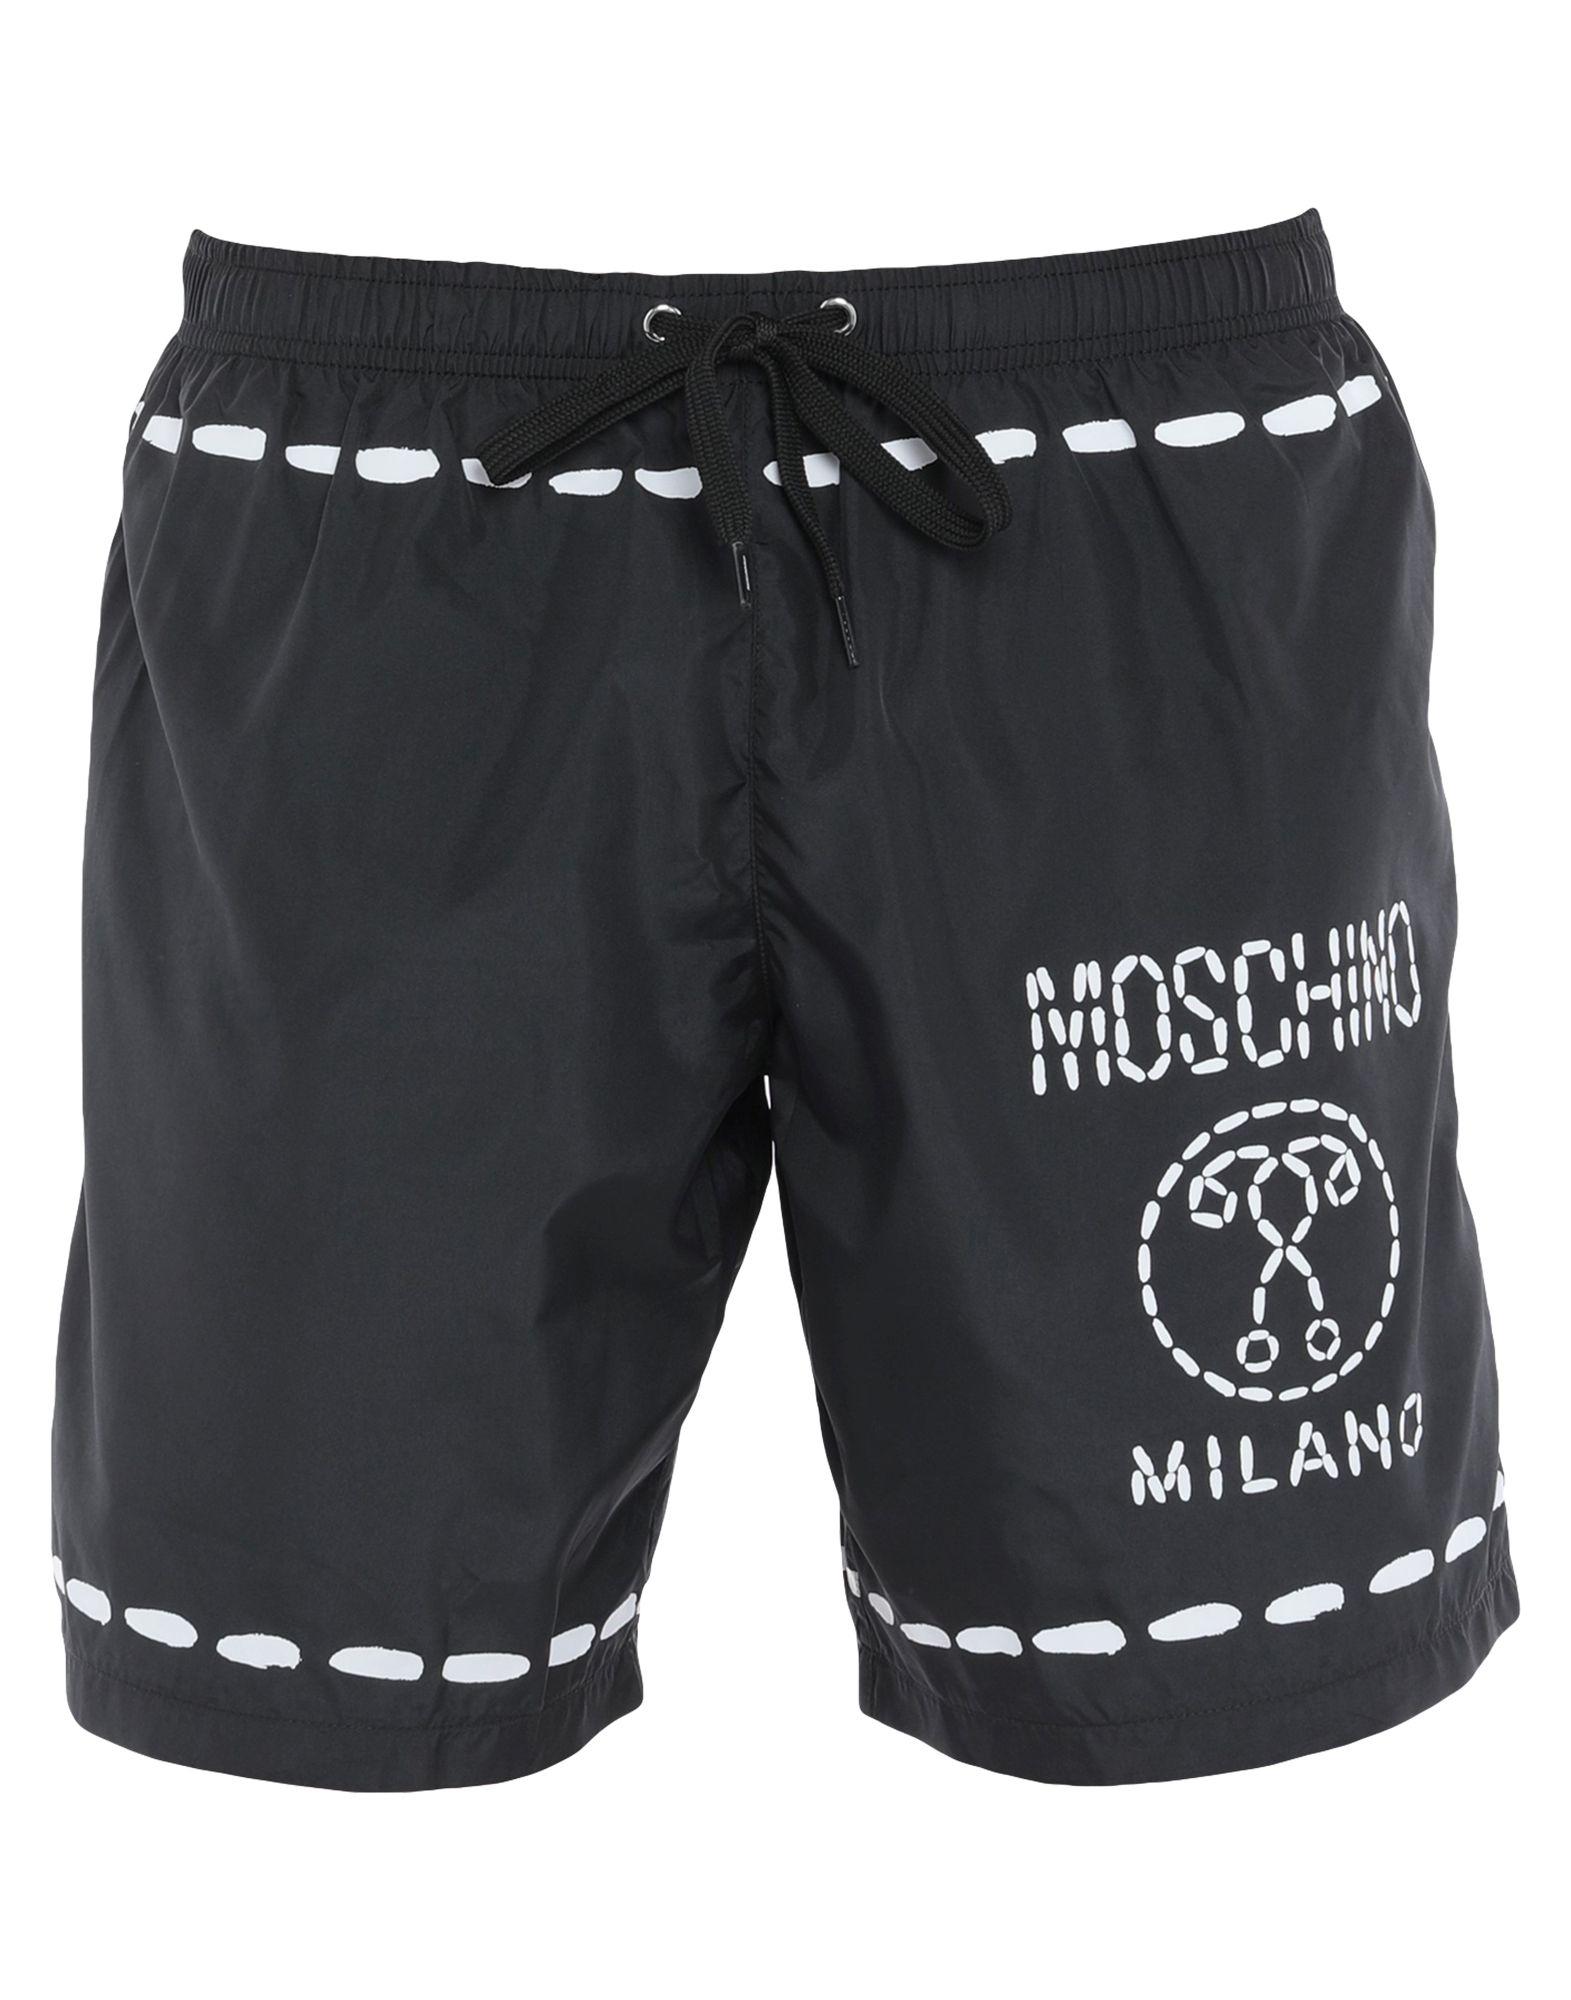 Moschino Synthetic Swim Trunks in Black for Men - Lyst